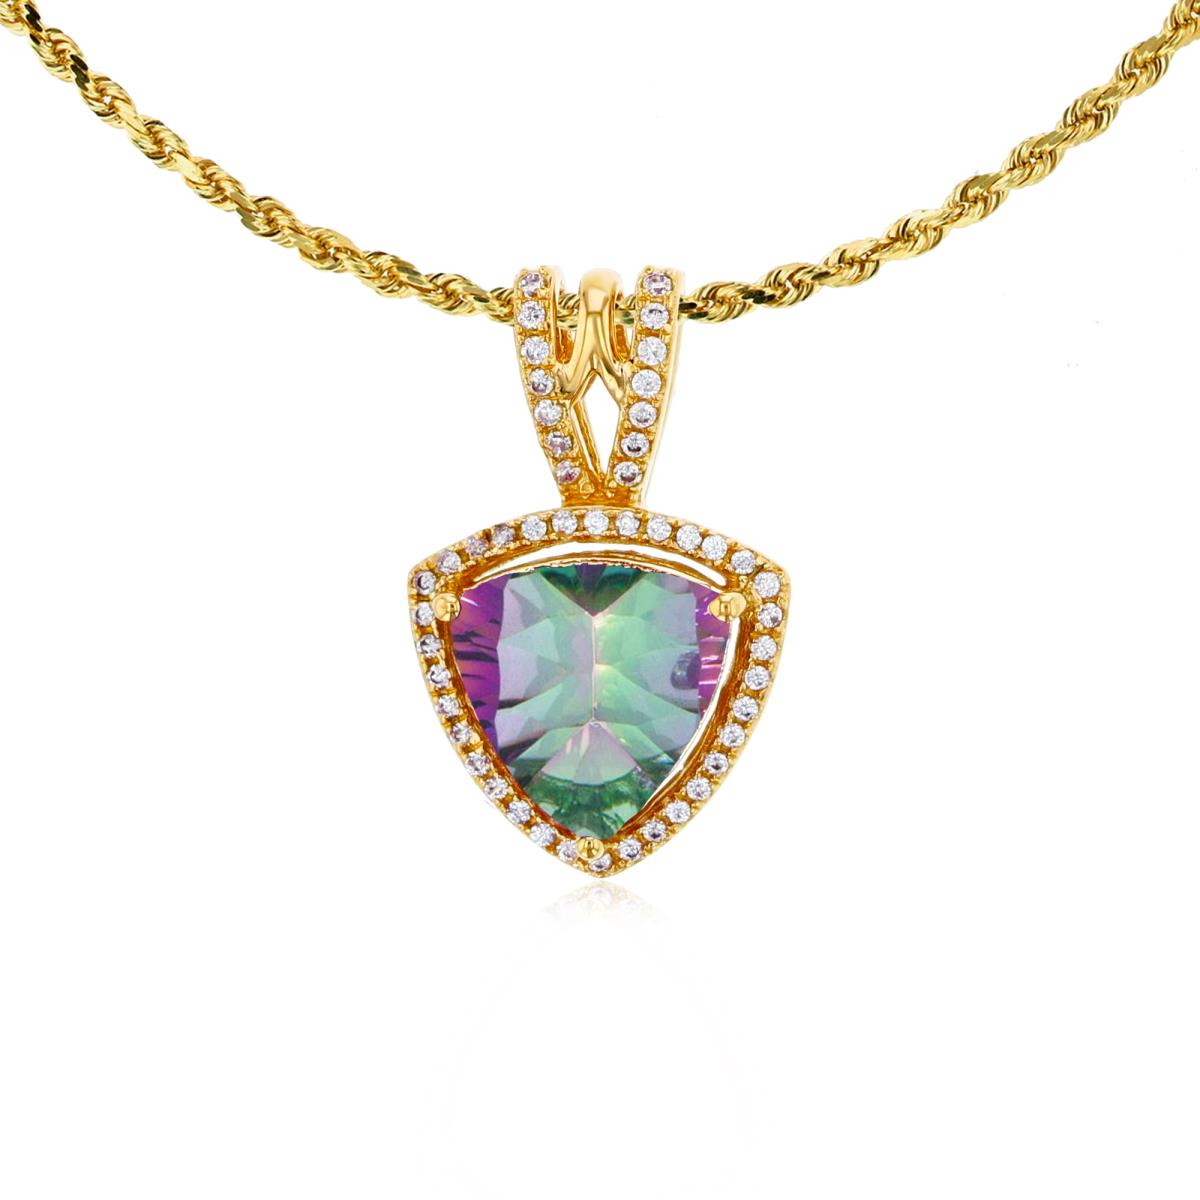 10K Yellow Gold 8mm Trillion Mystic Green Topaz & 0.13 CTTW Diamonds Frame 18" Rope Chain Necklace